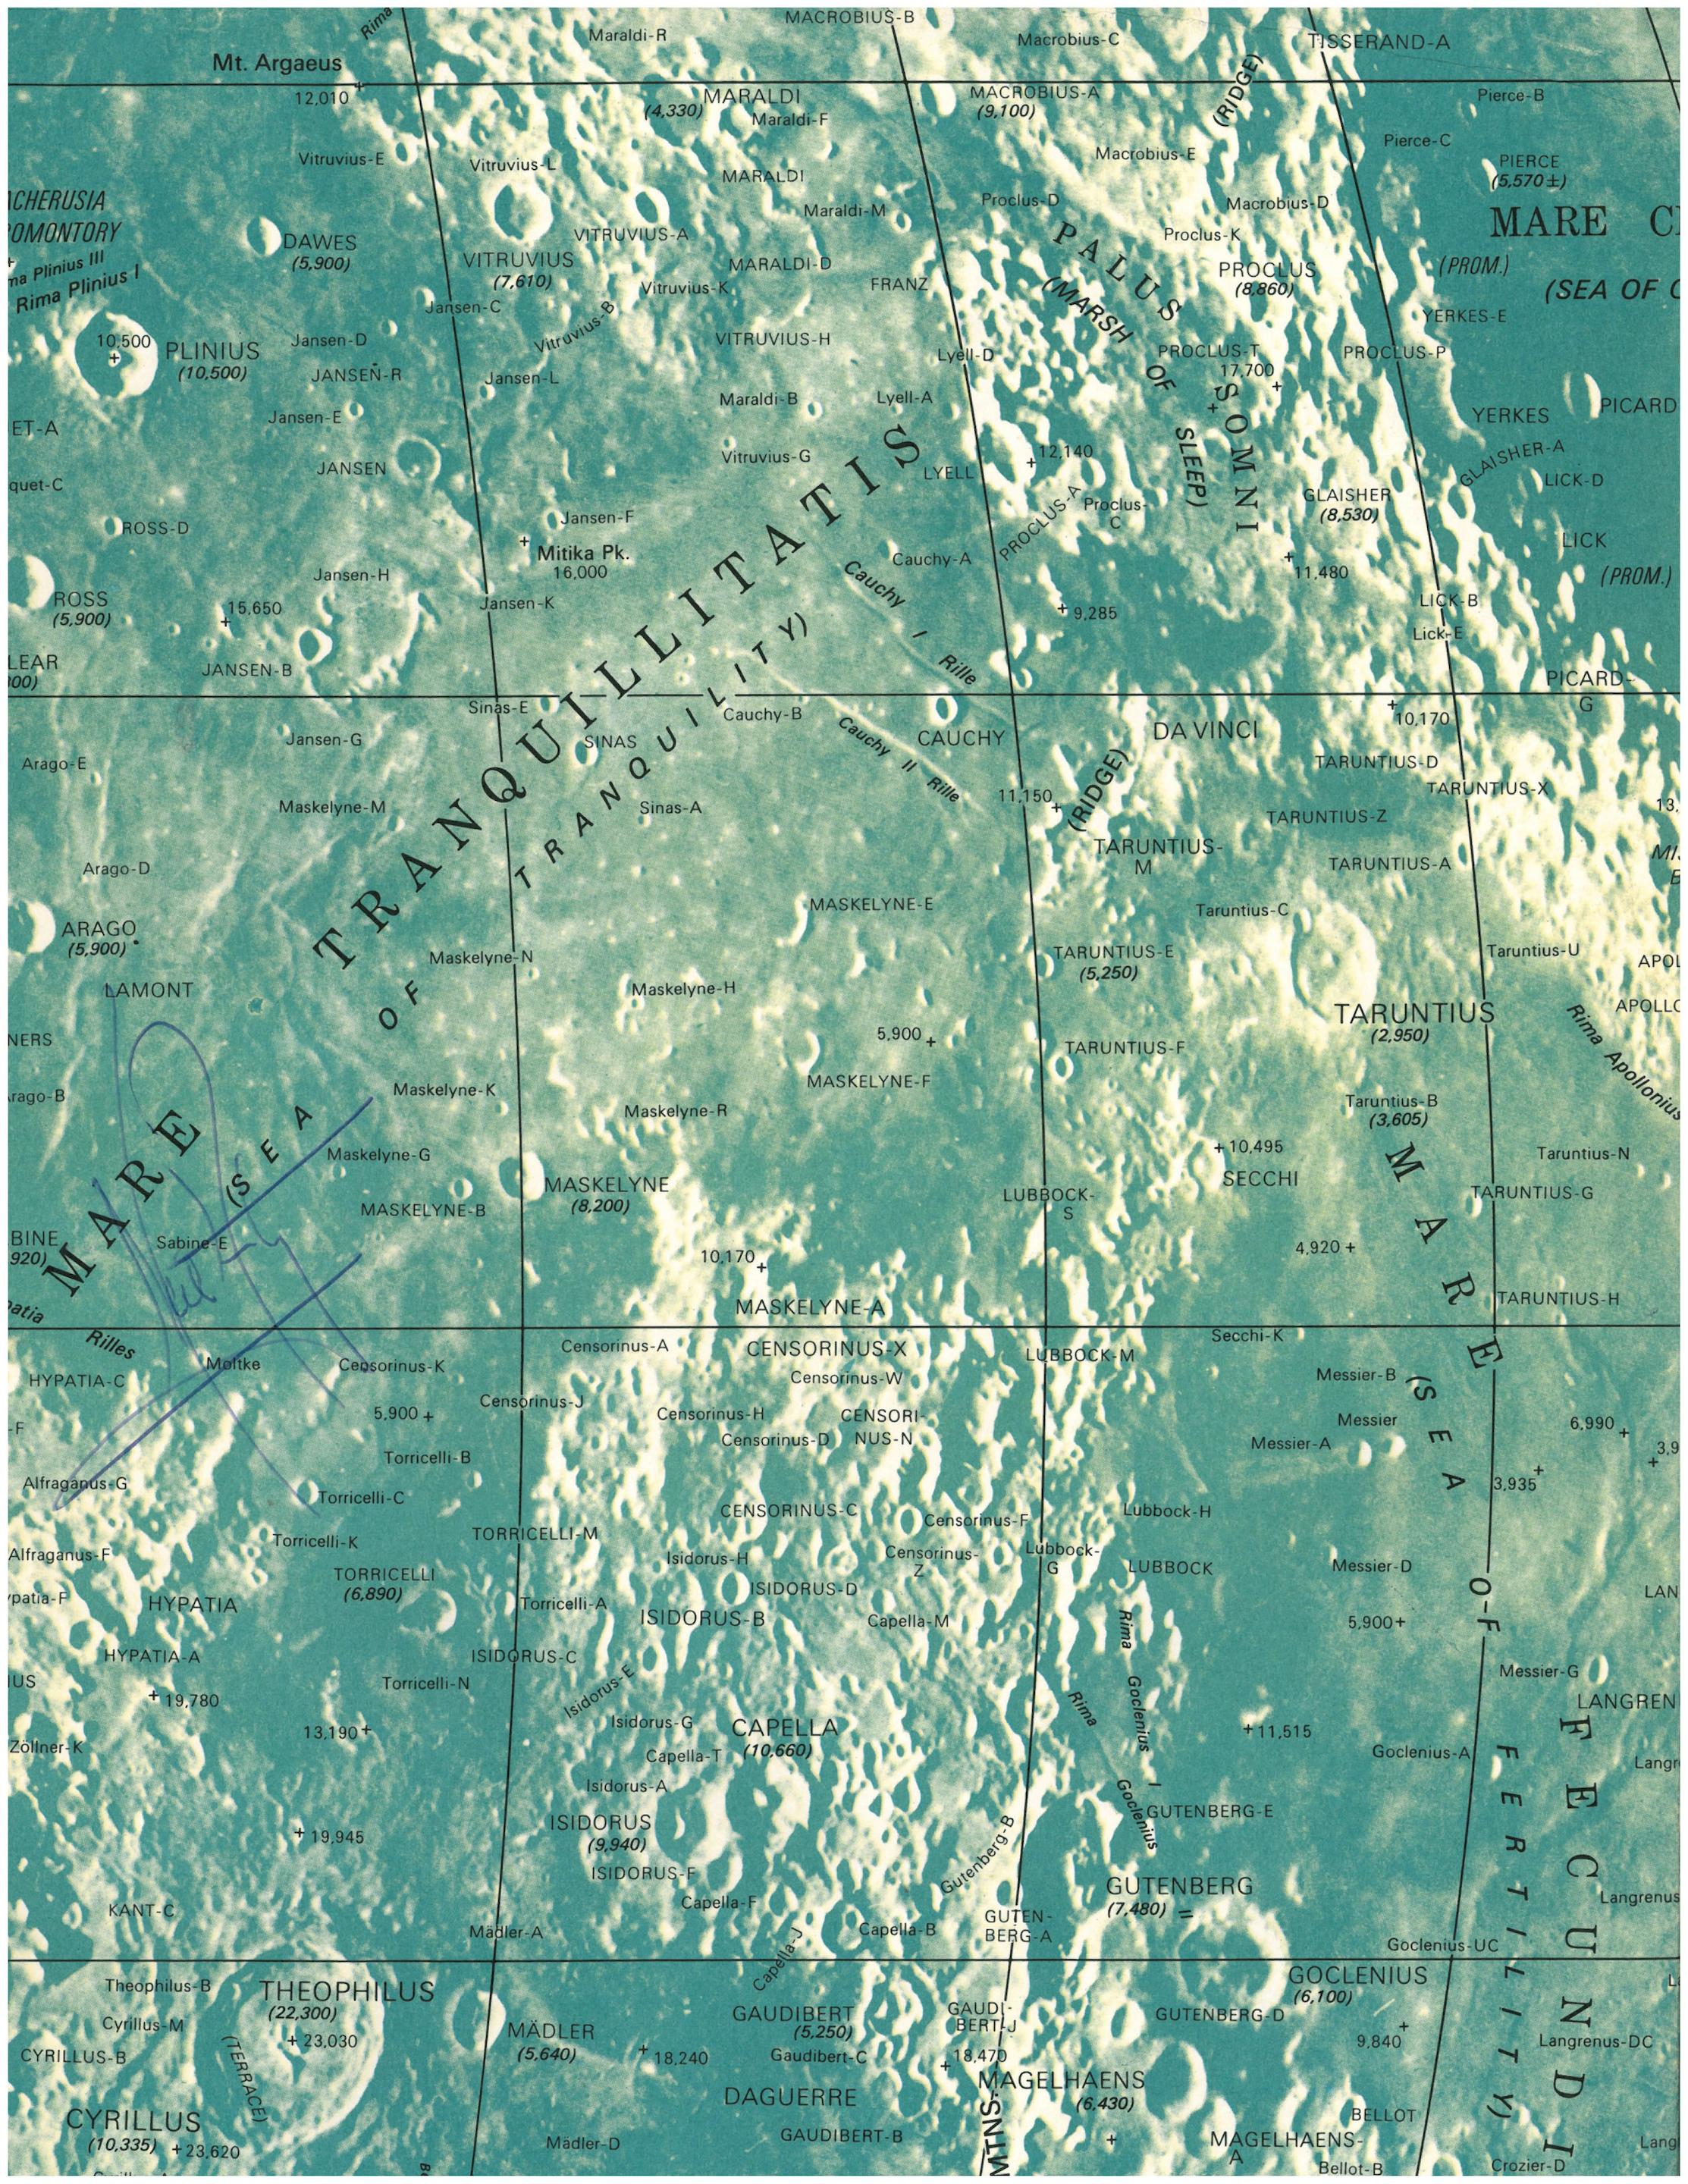 MOON MAP SIGNED BY ARMSTRONG.